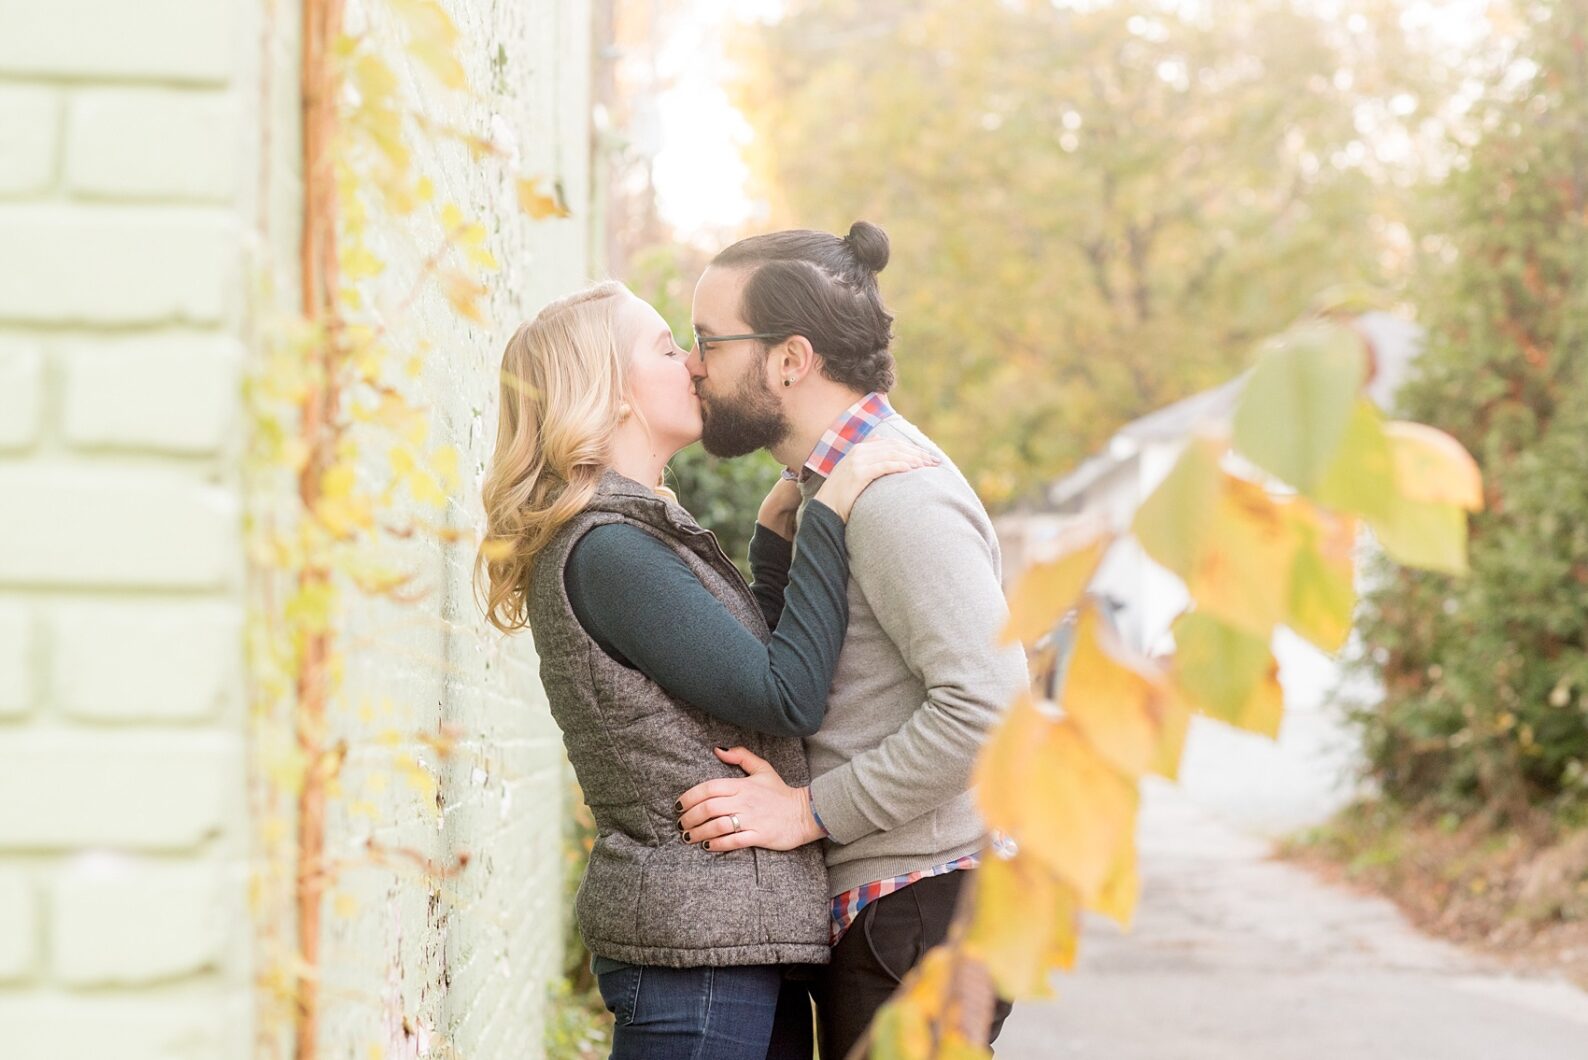 Mikkel Paige Photography photos of a downtown Durham engagement session.